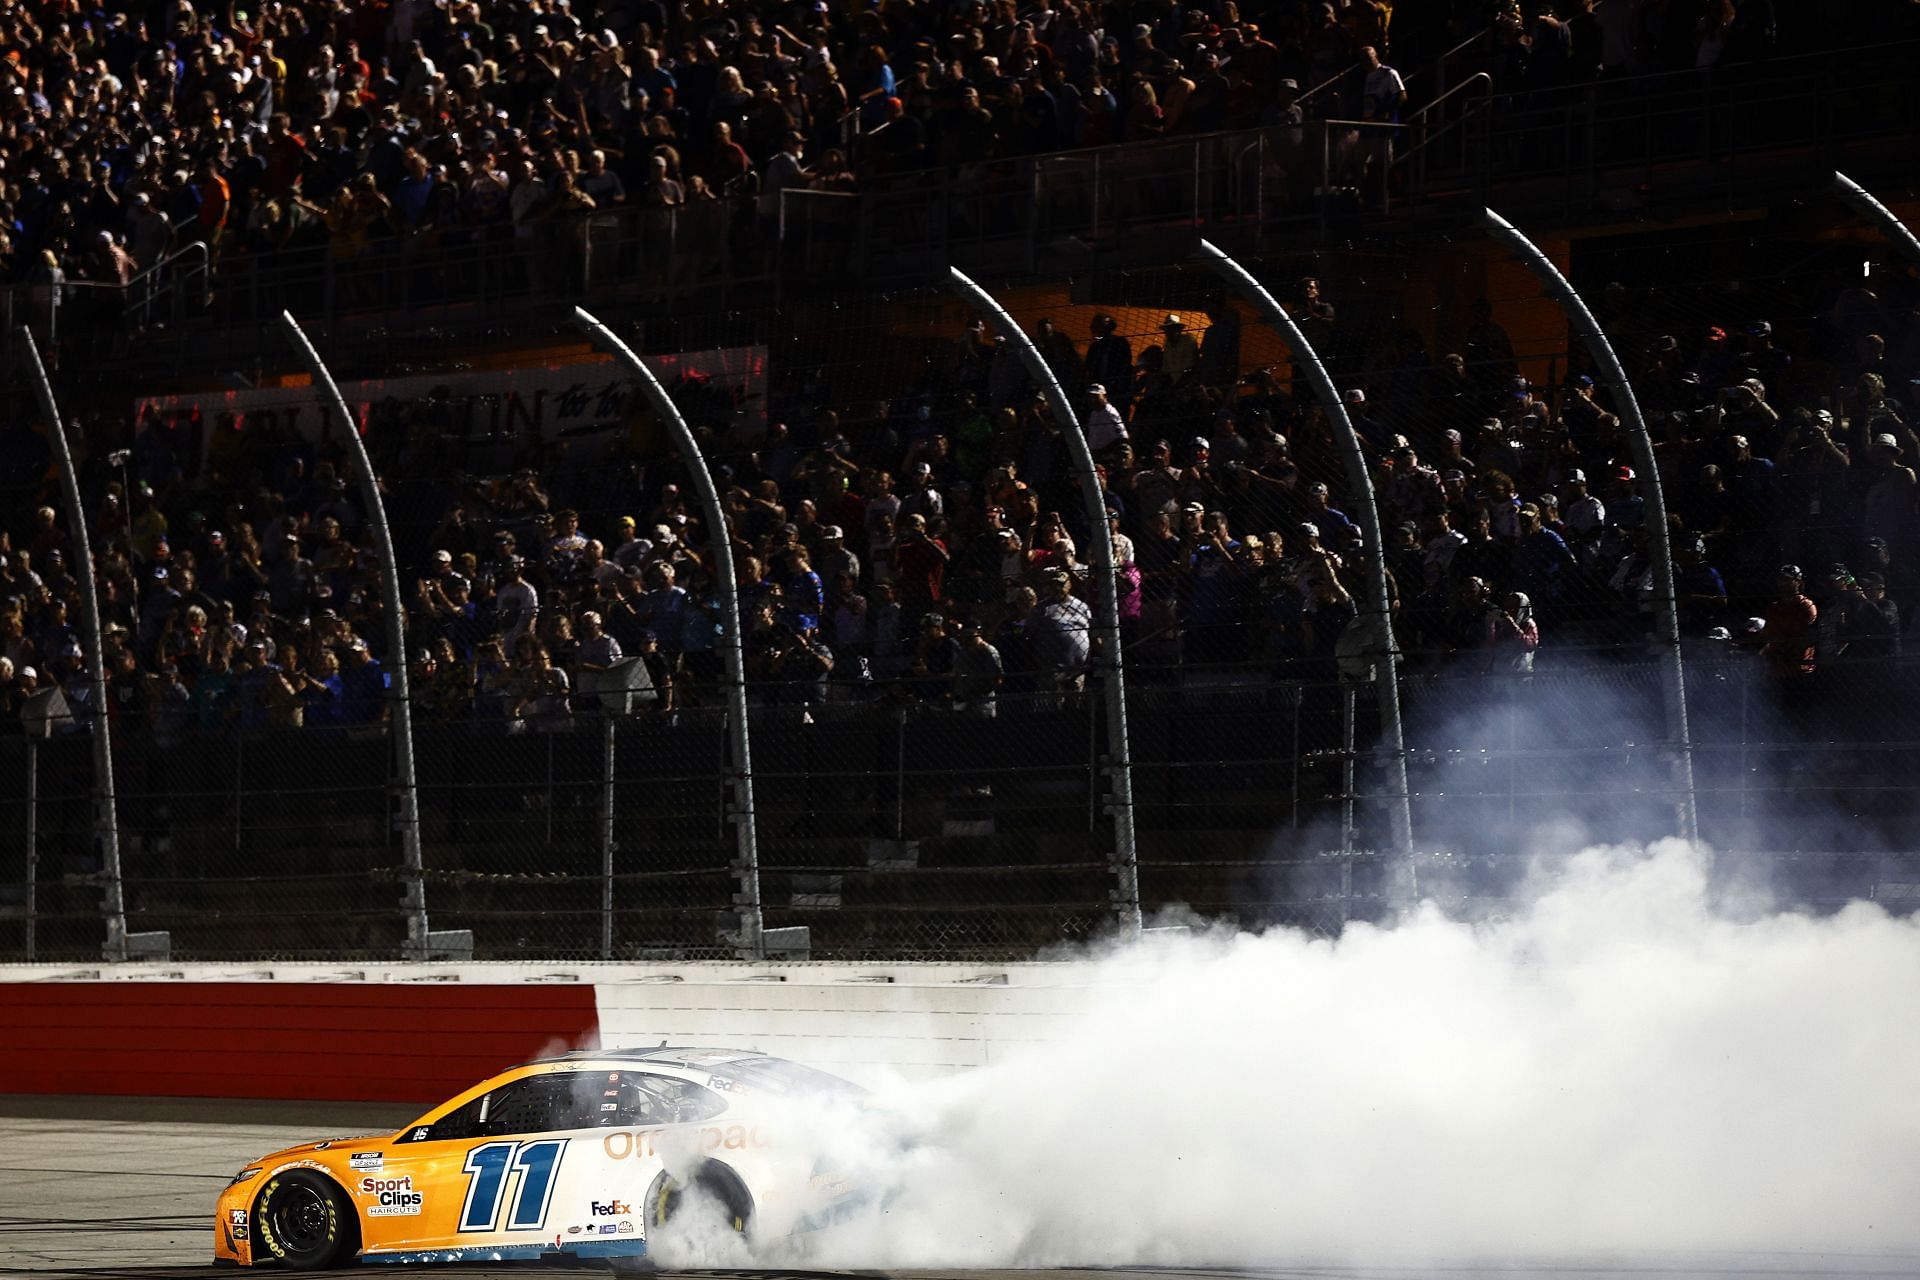 Denny Hamlin celebrates with a burnout after winning the 2021 NASCAR Cup Series Cook Out Southern 500 at Darlington Raceway in Darlington, South Carolina. (Photo by Jared C. Tilton/Getty Images)